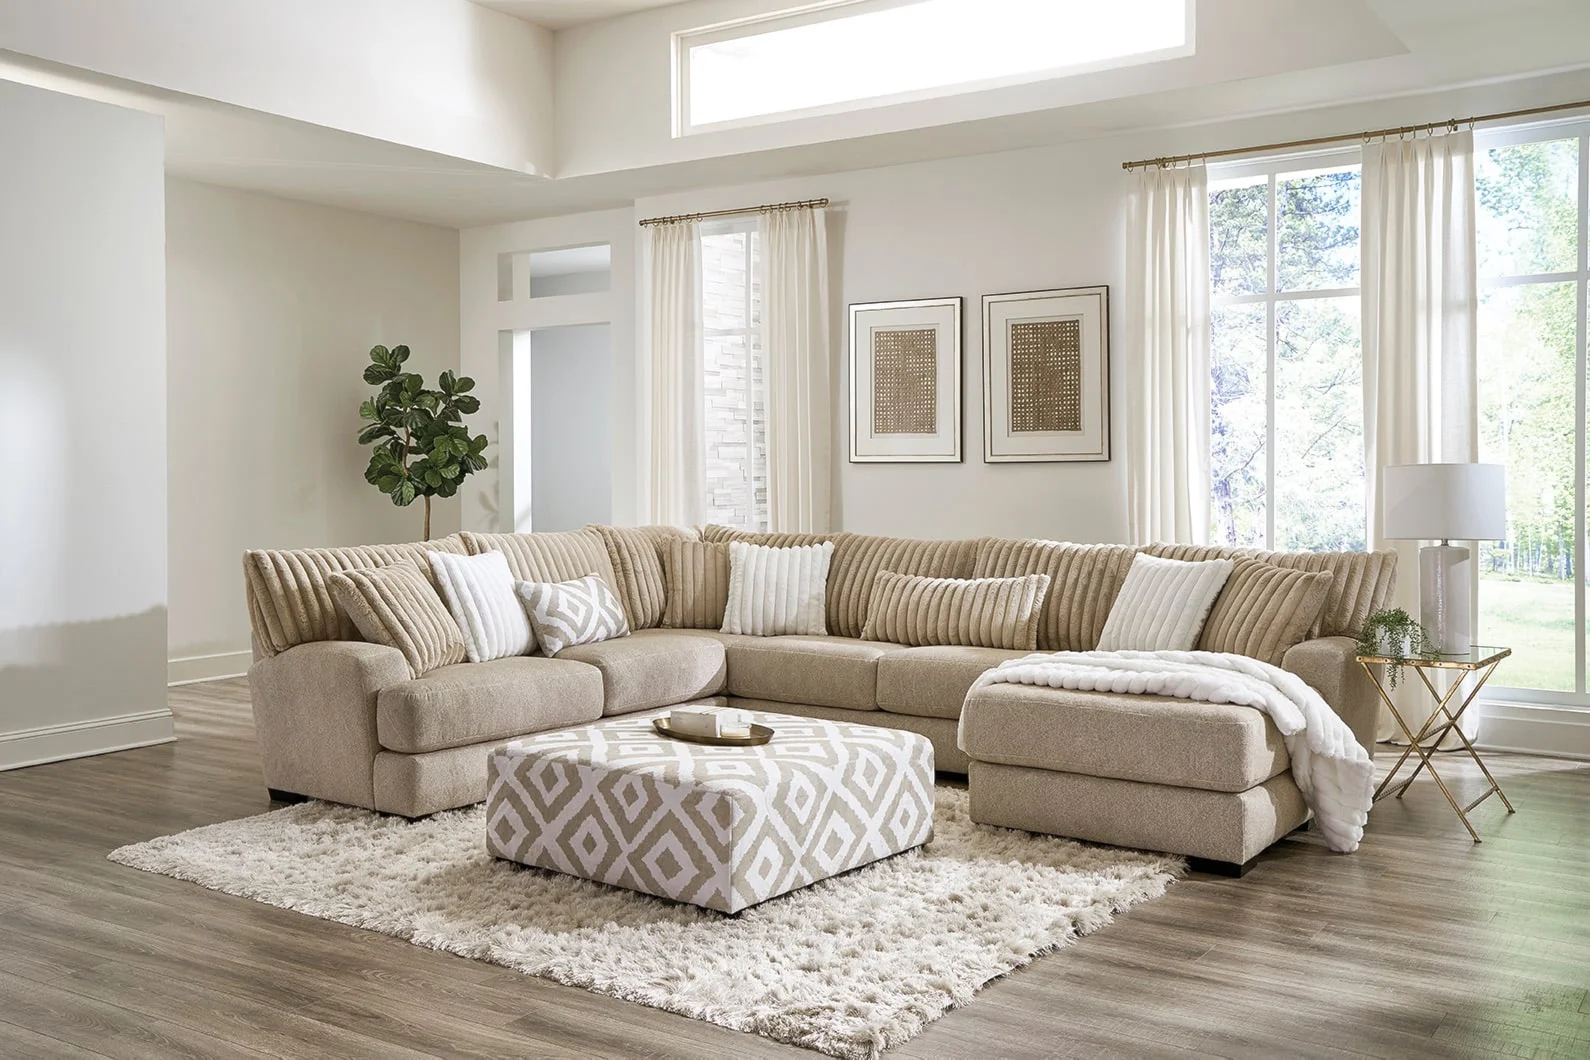 Clarissa 88180 CLARISSA TOAST 3 PIECE SECTIONAL. | WITH LAF CHAISE | 7 ...